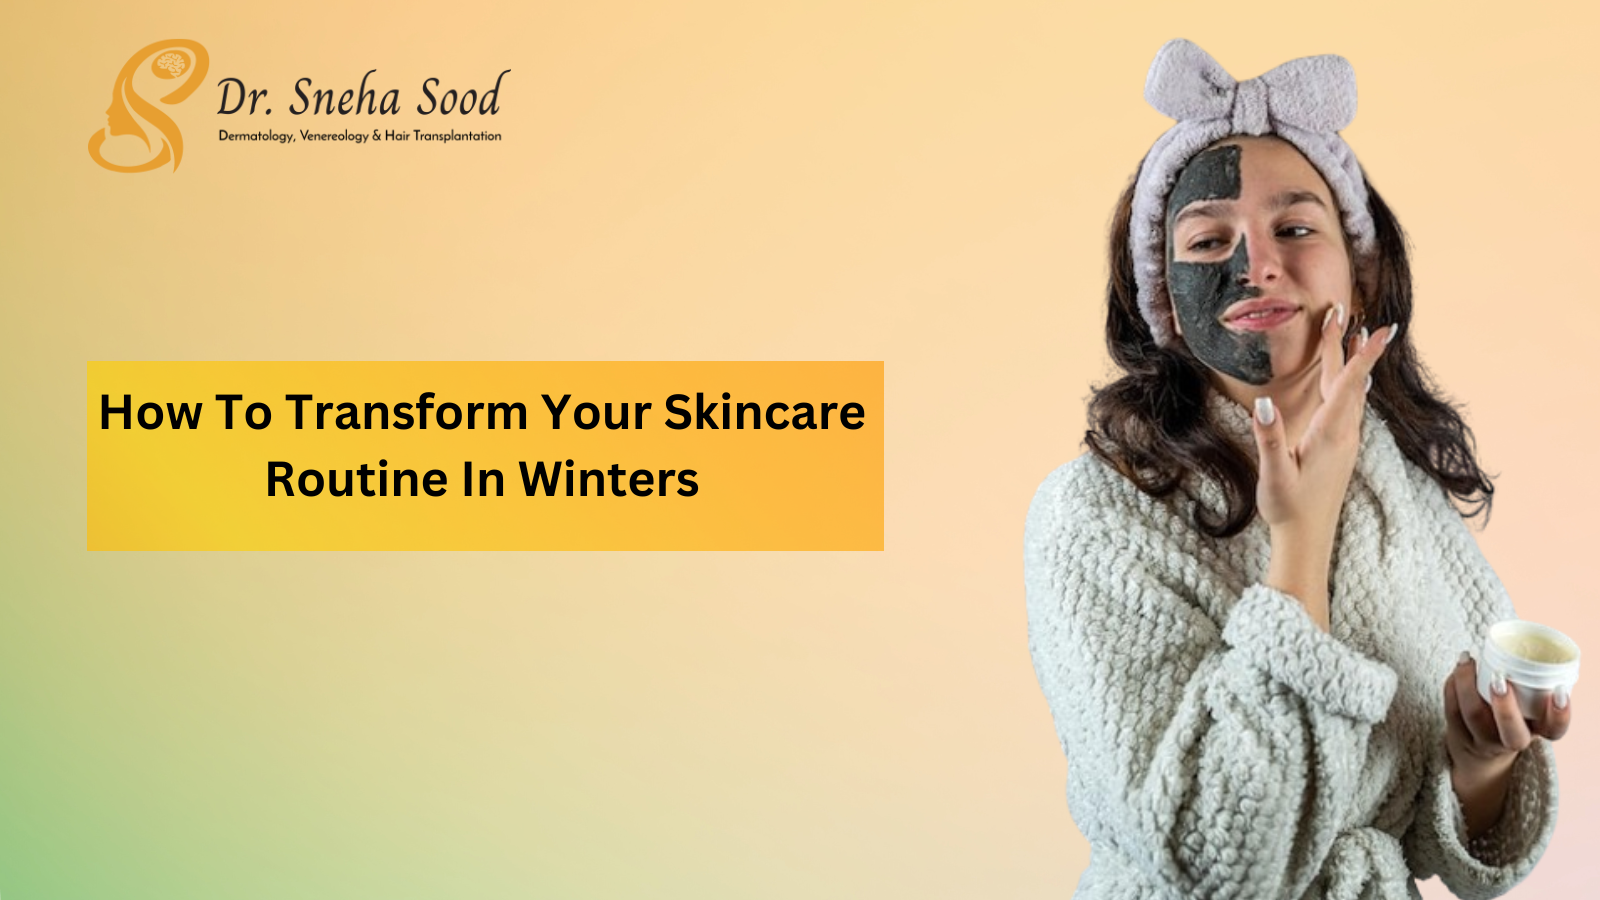 How To Transform Your Skincare Routine In Winters